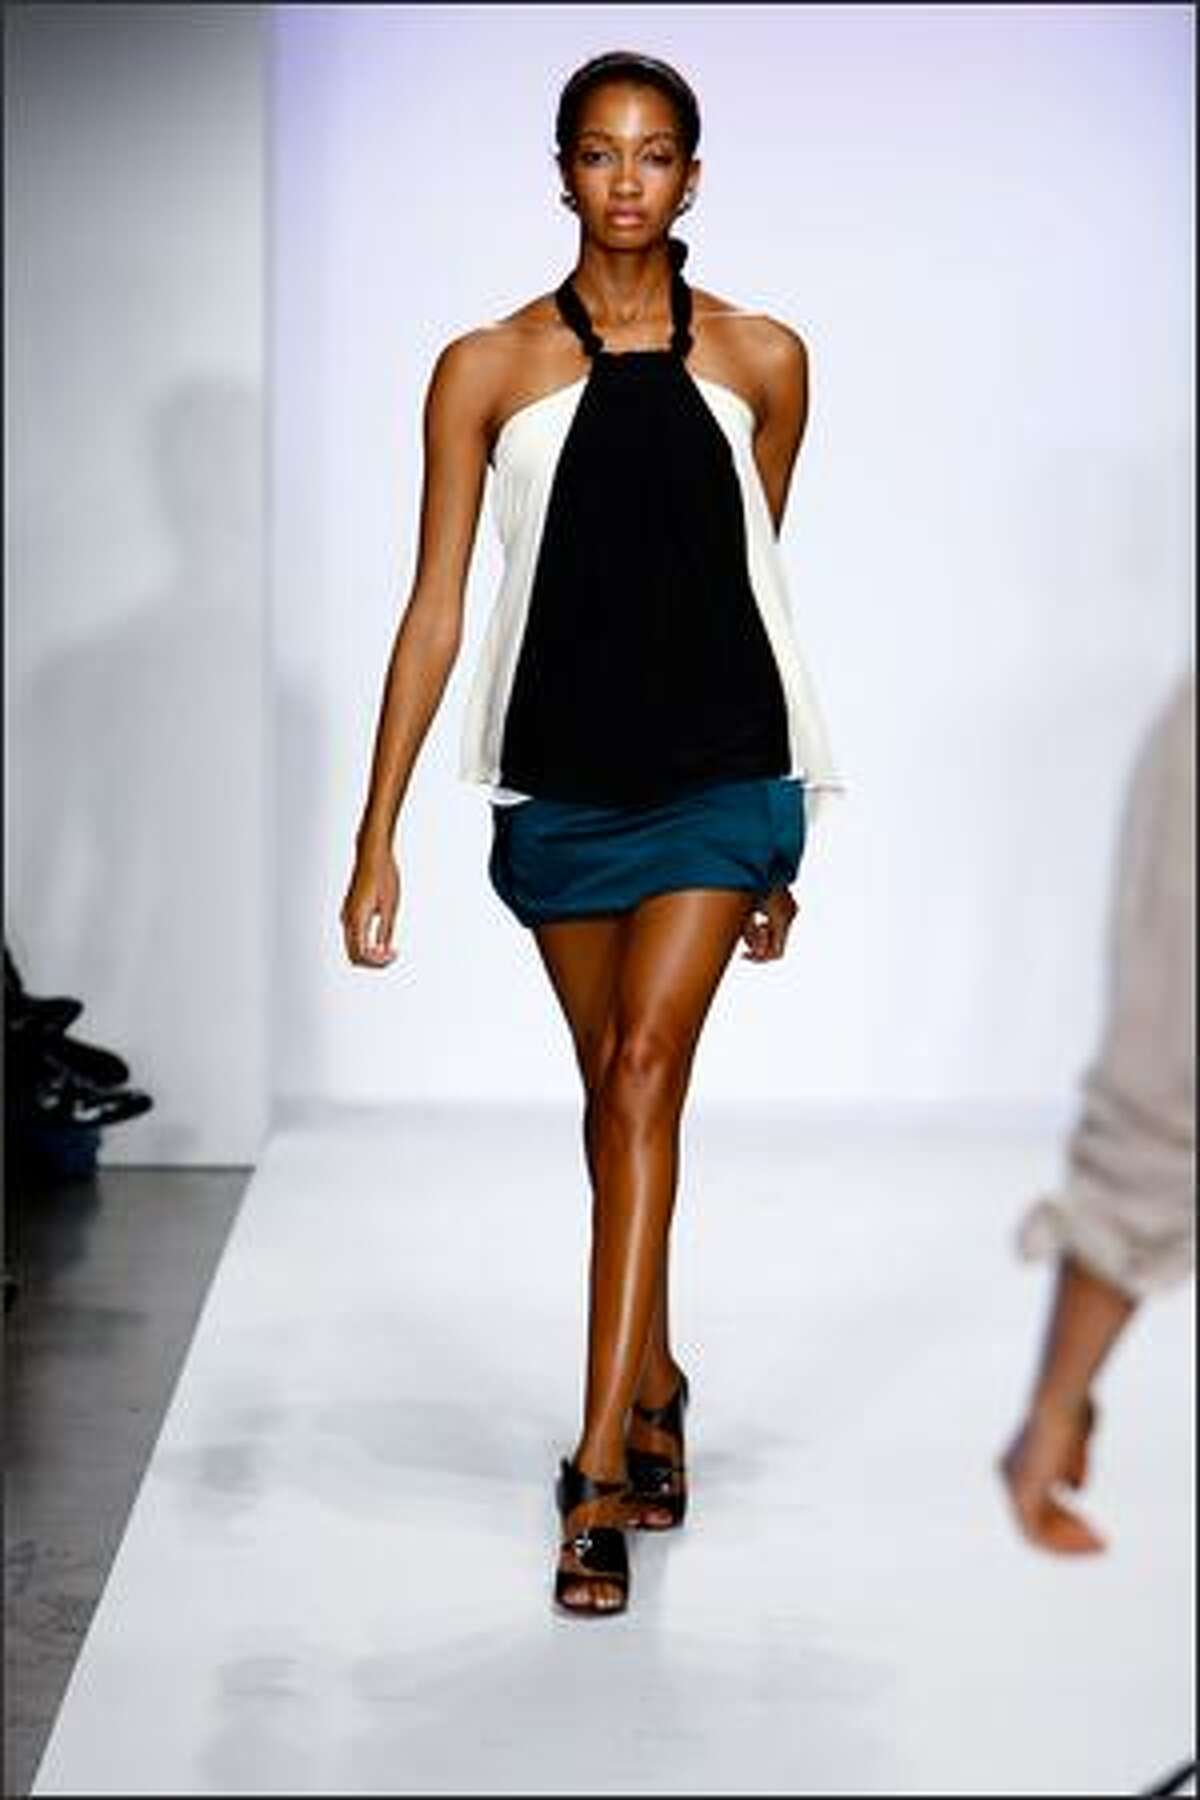 A model walks the runway at the Crispin & Basilo Spring 2009 fashion show during Mercedes-Benz Fashion Week held at Smashbox Studios on Tuesday in Culver City, Calif.